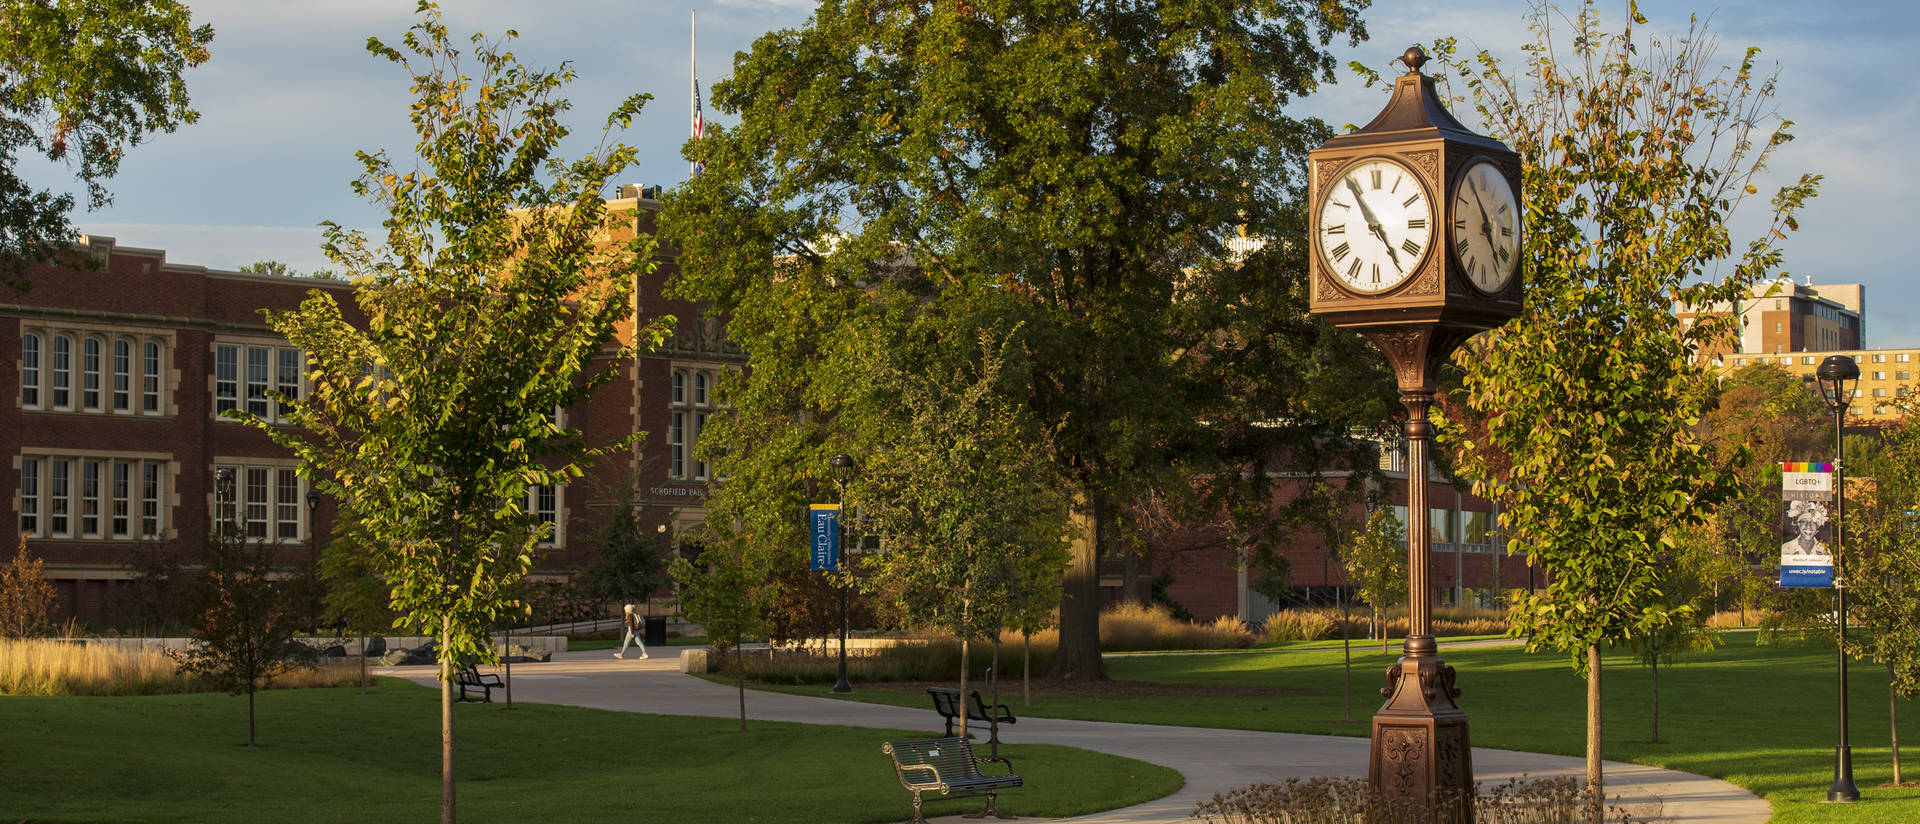 Campus mall and clock tower in fall